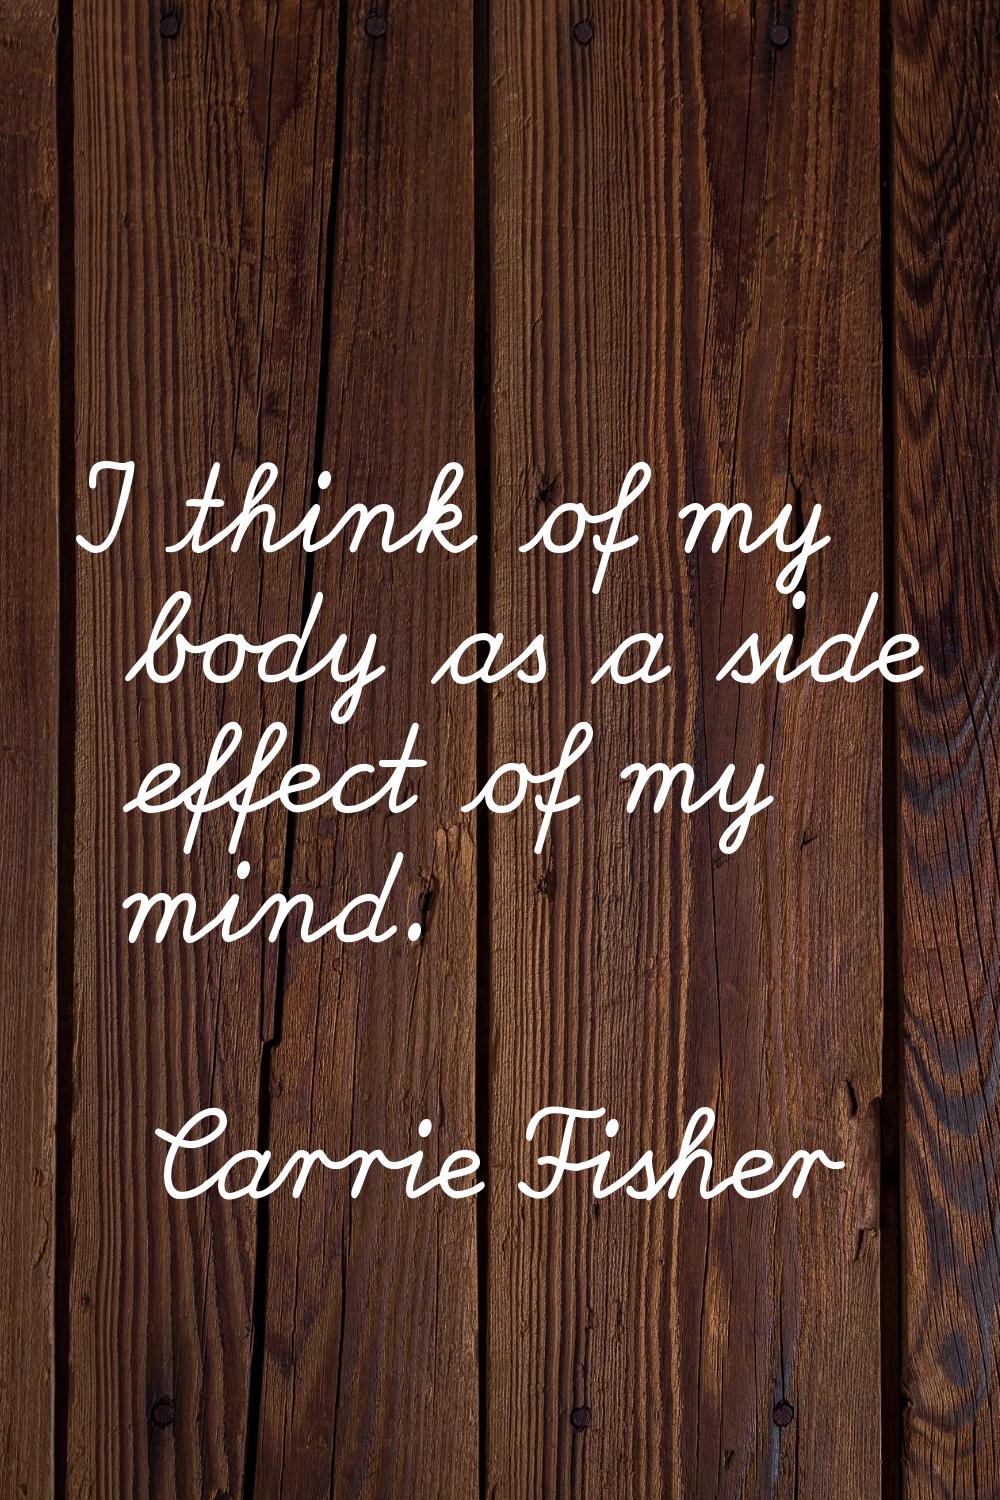 I think of my body as a side effect of my mind.